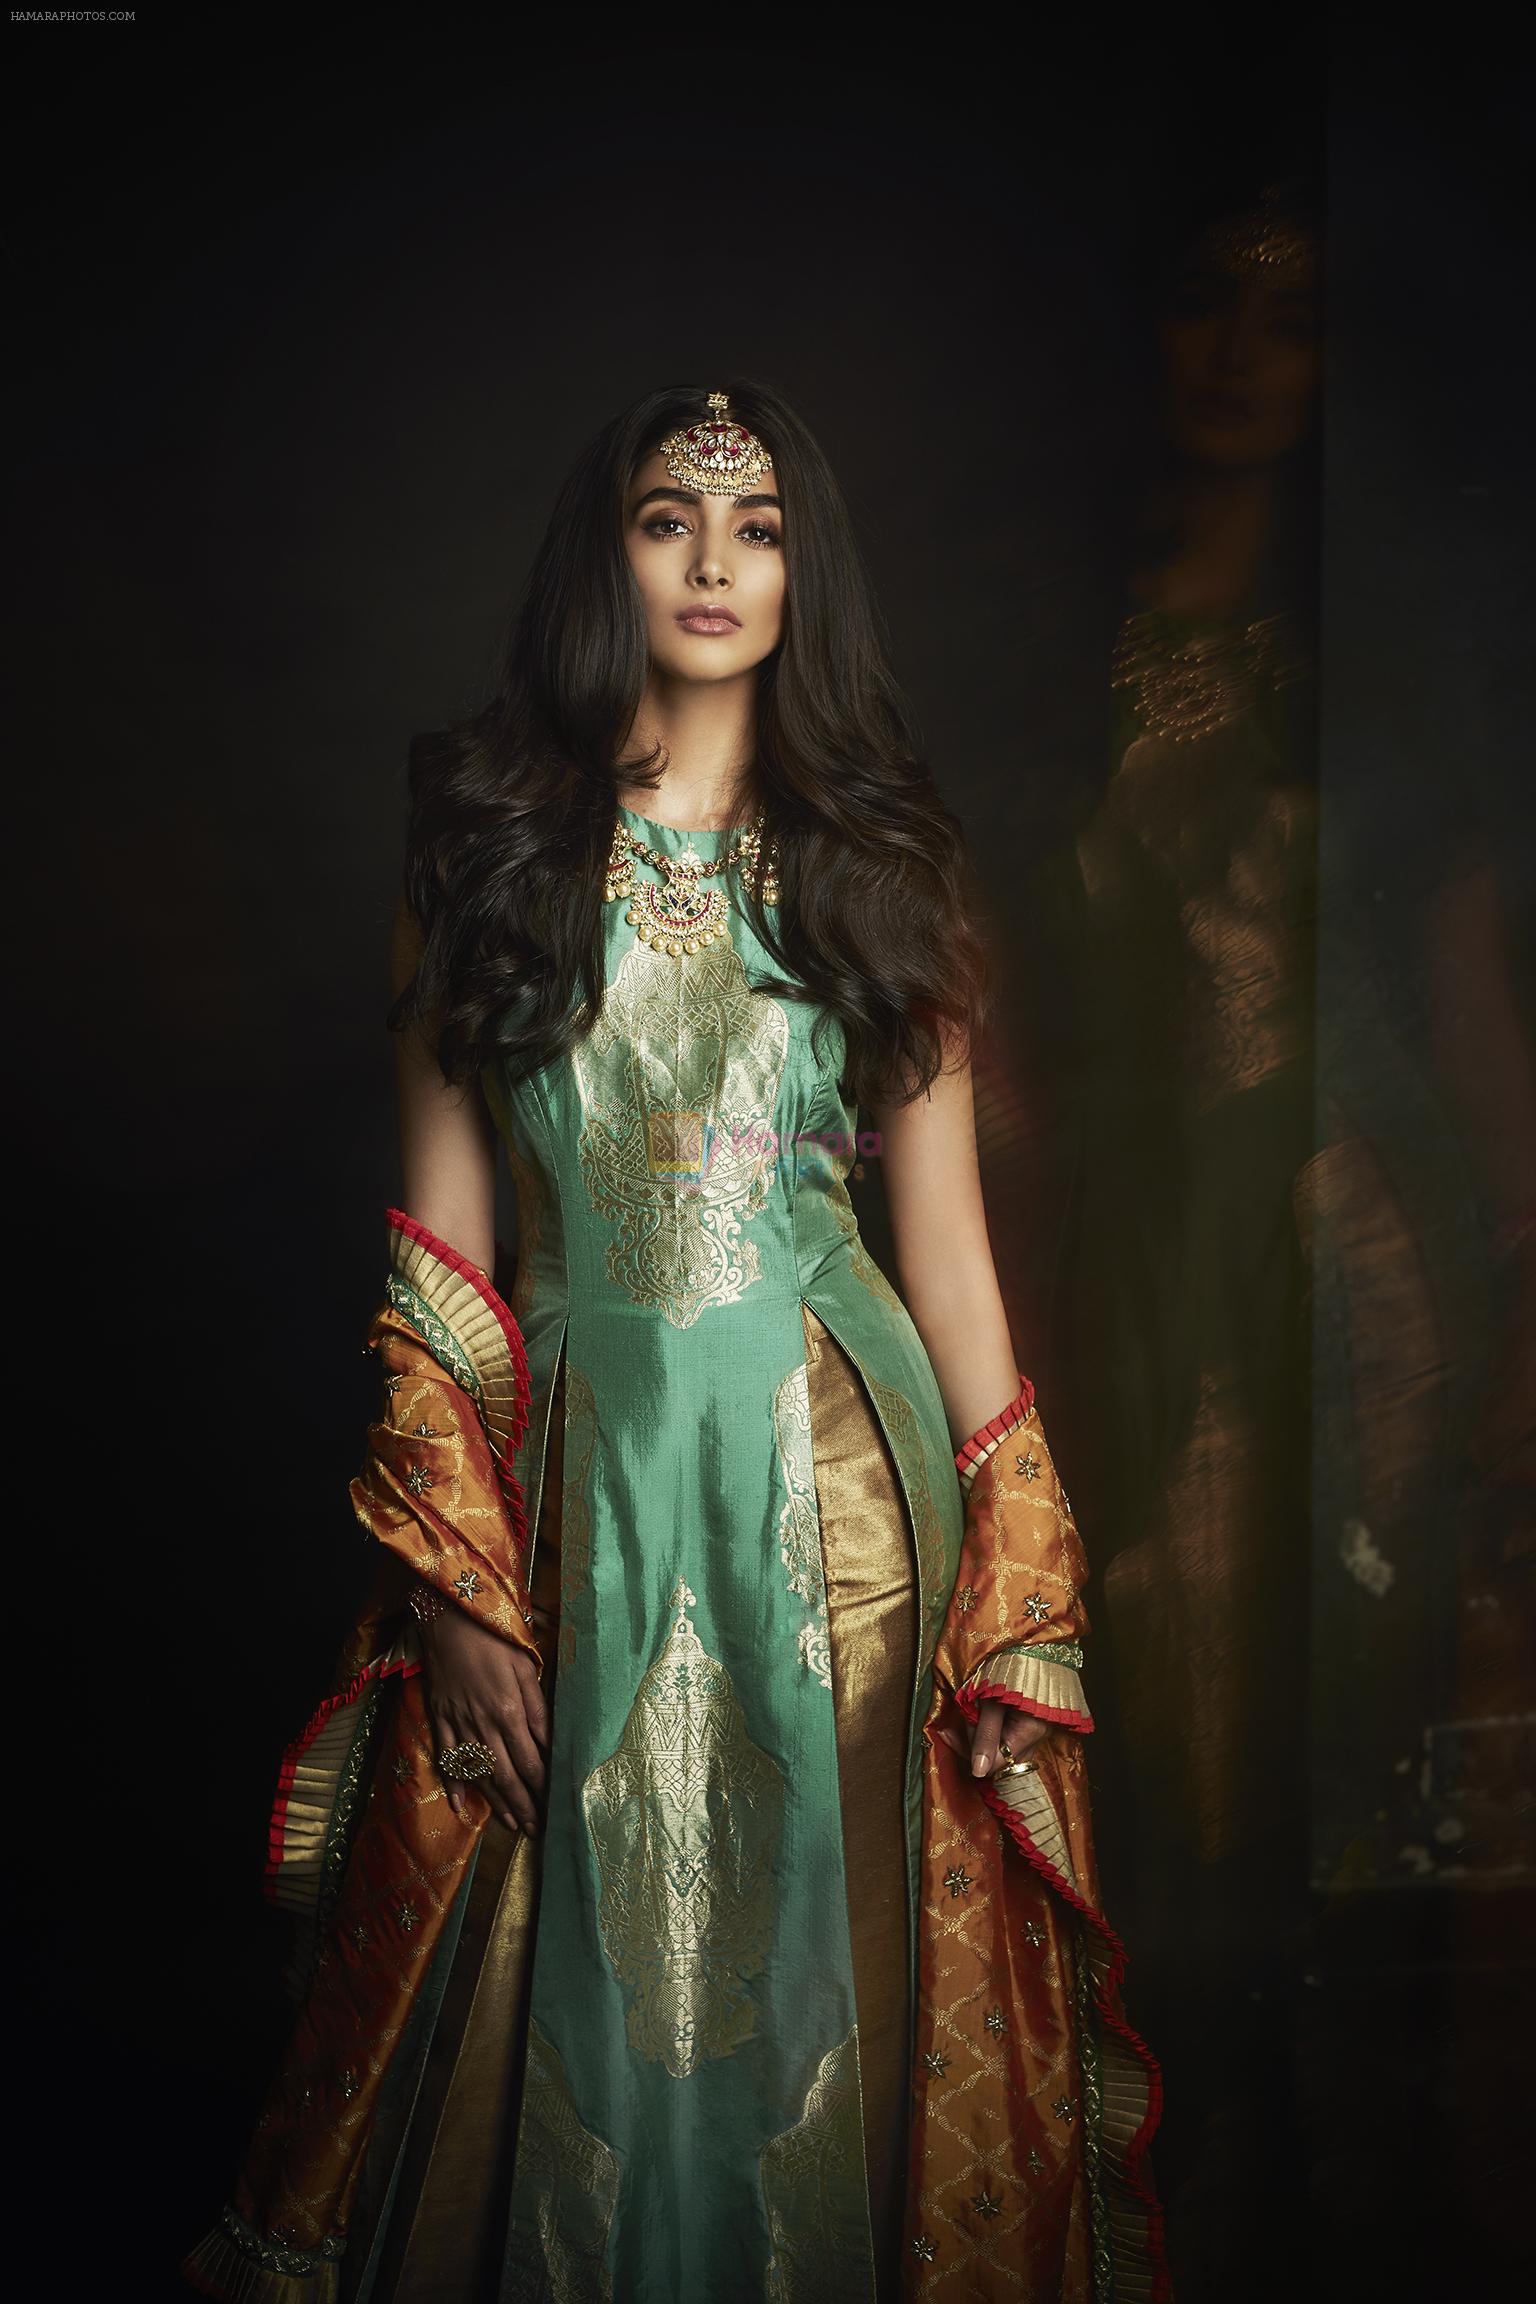 Pooja Hegde graces the cover of Pernia's Pop-Up Shop's October magazine